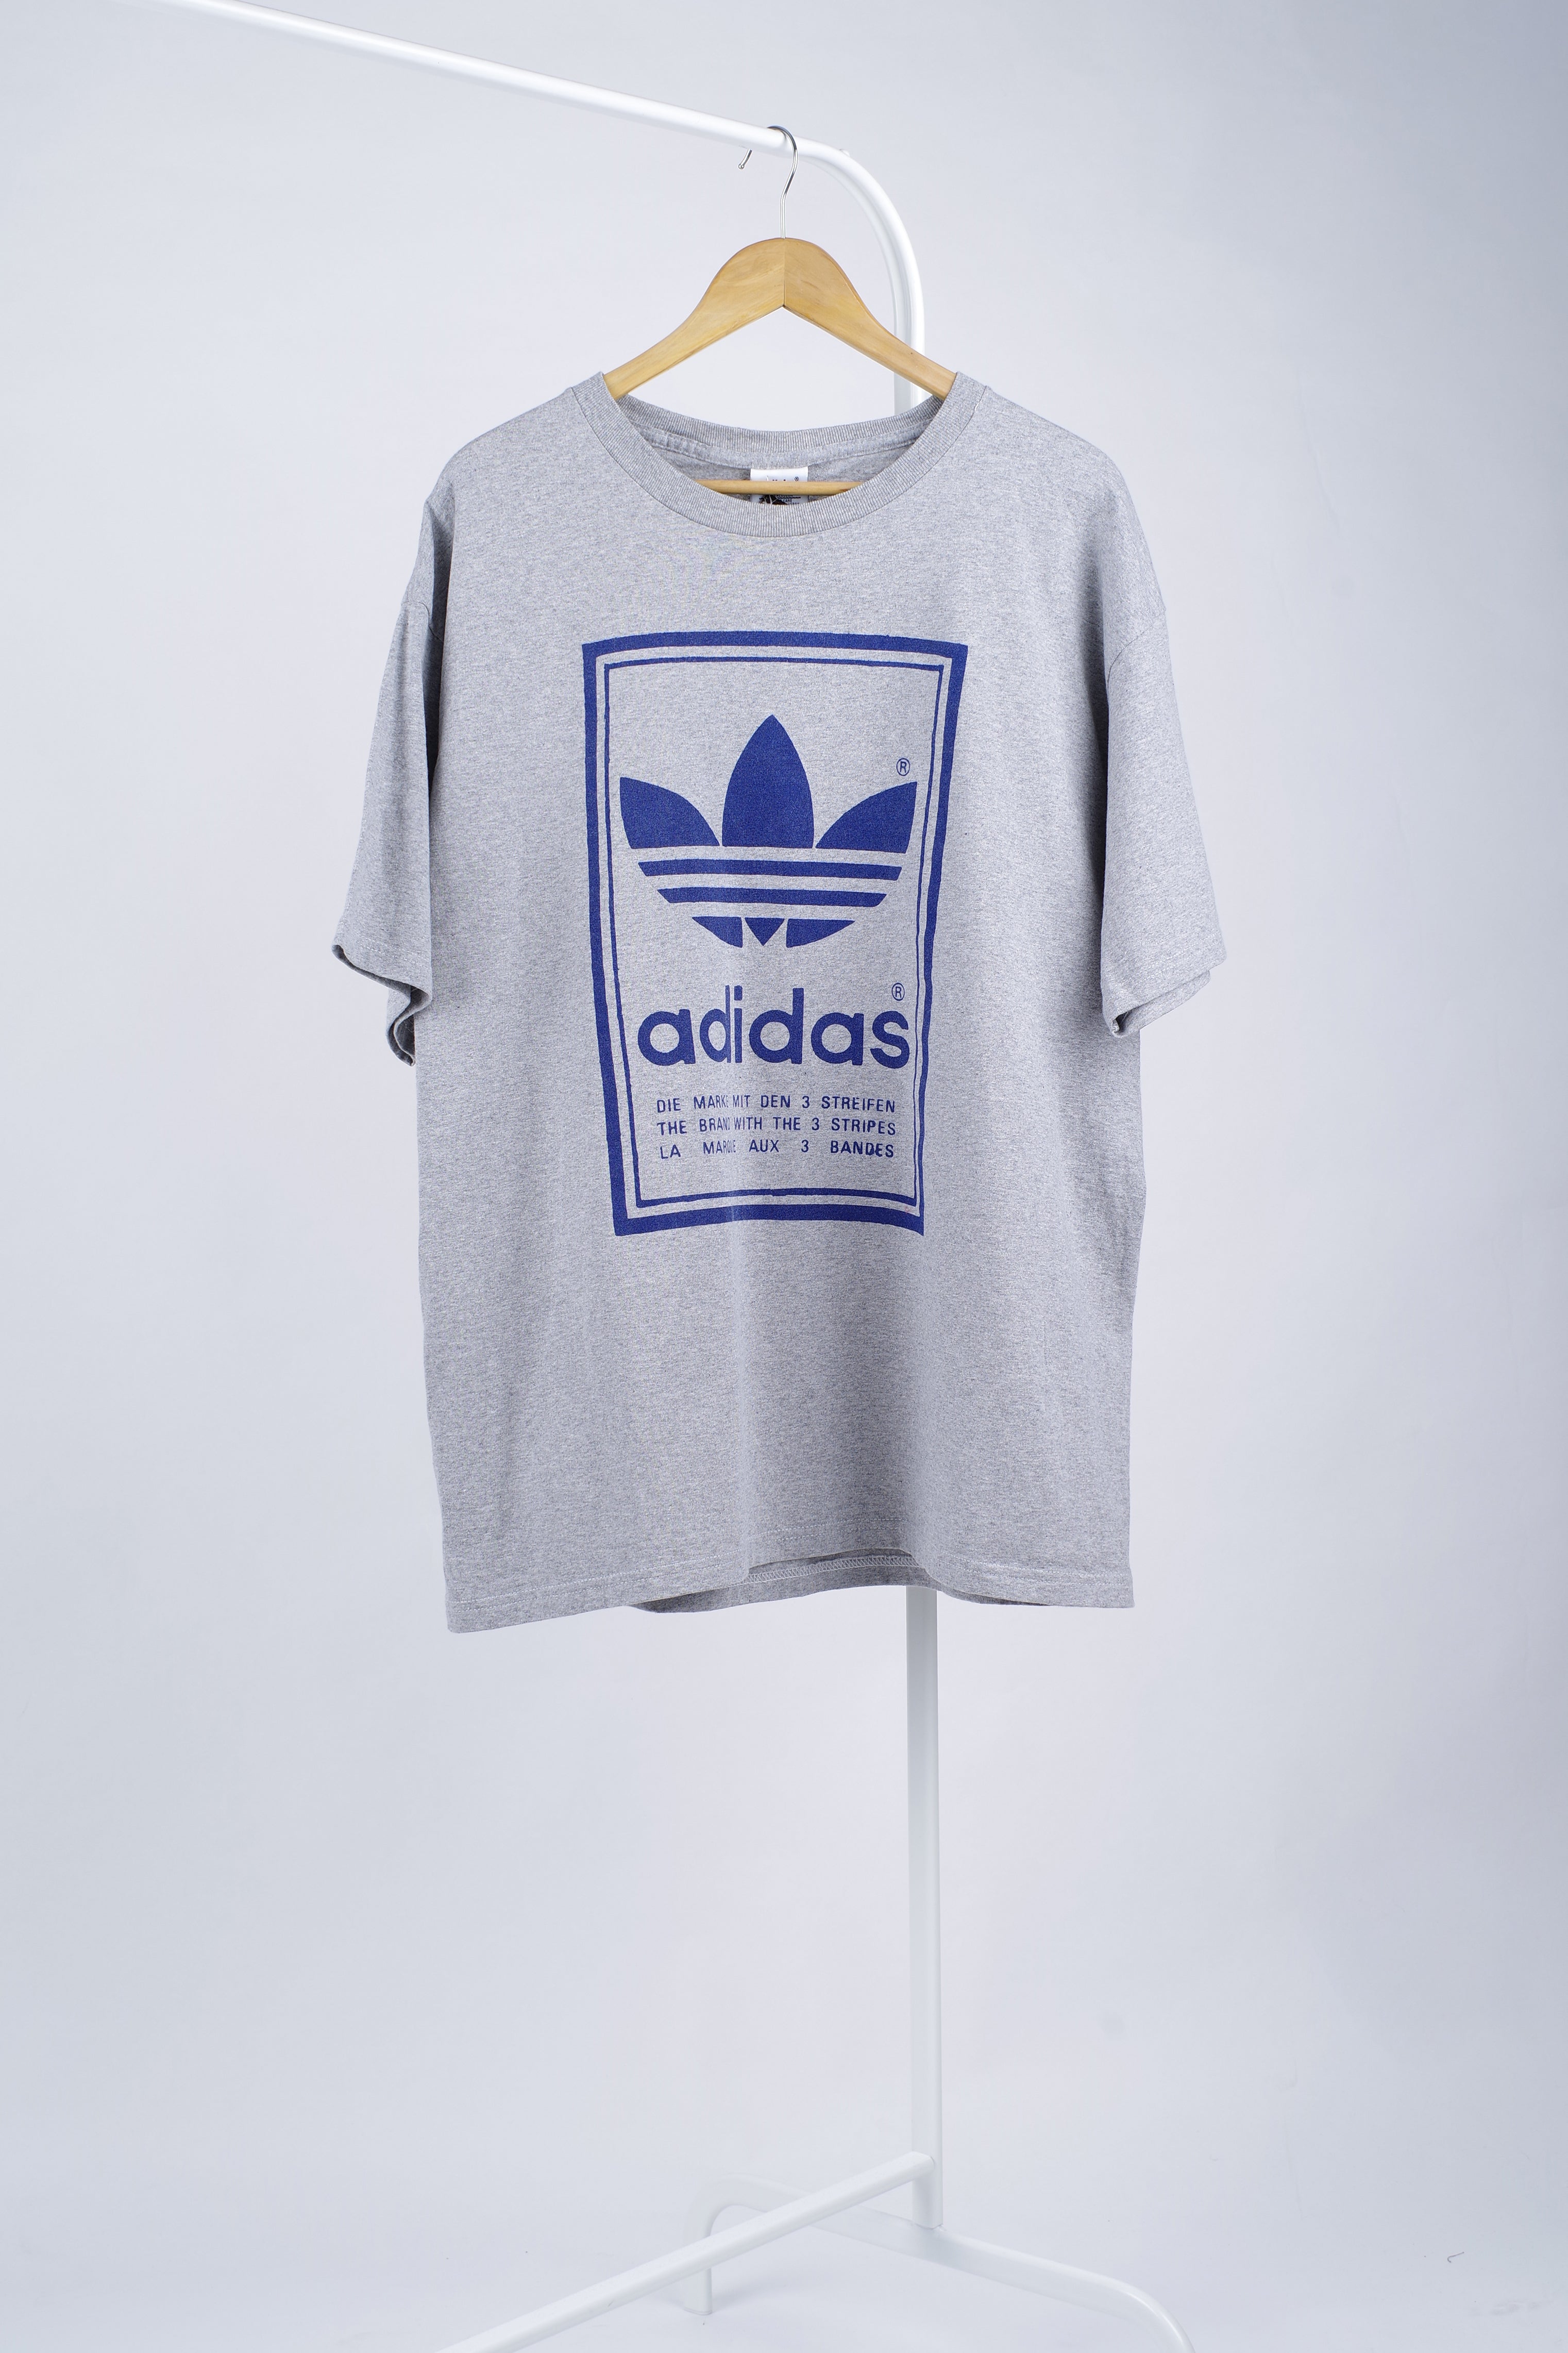 men\'s Gray T-shirt, Originals USA Adidas Size L in SecondFirst – Made Vintage